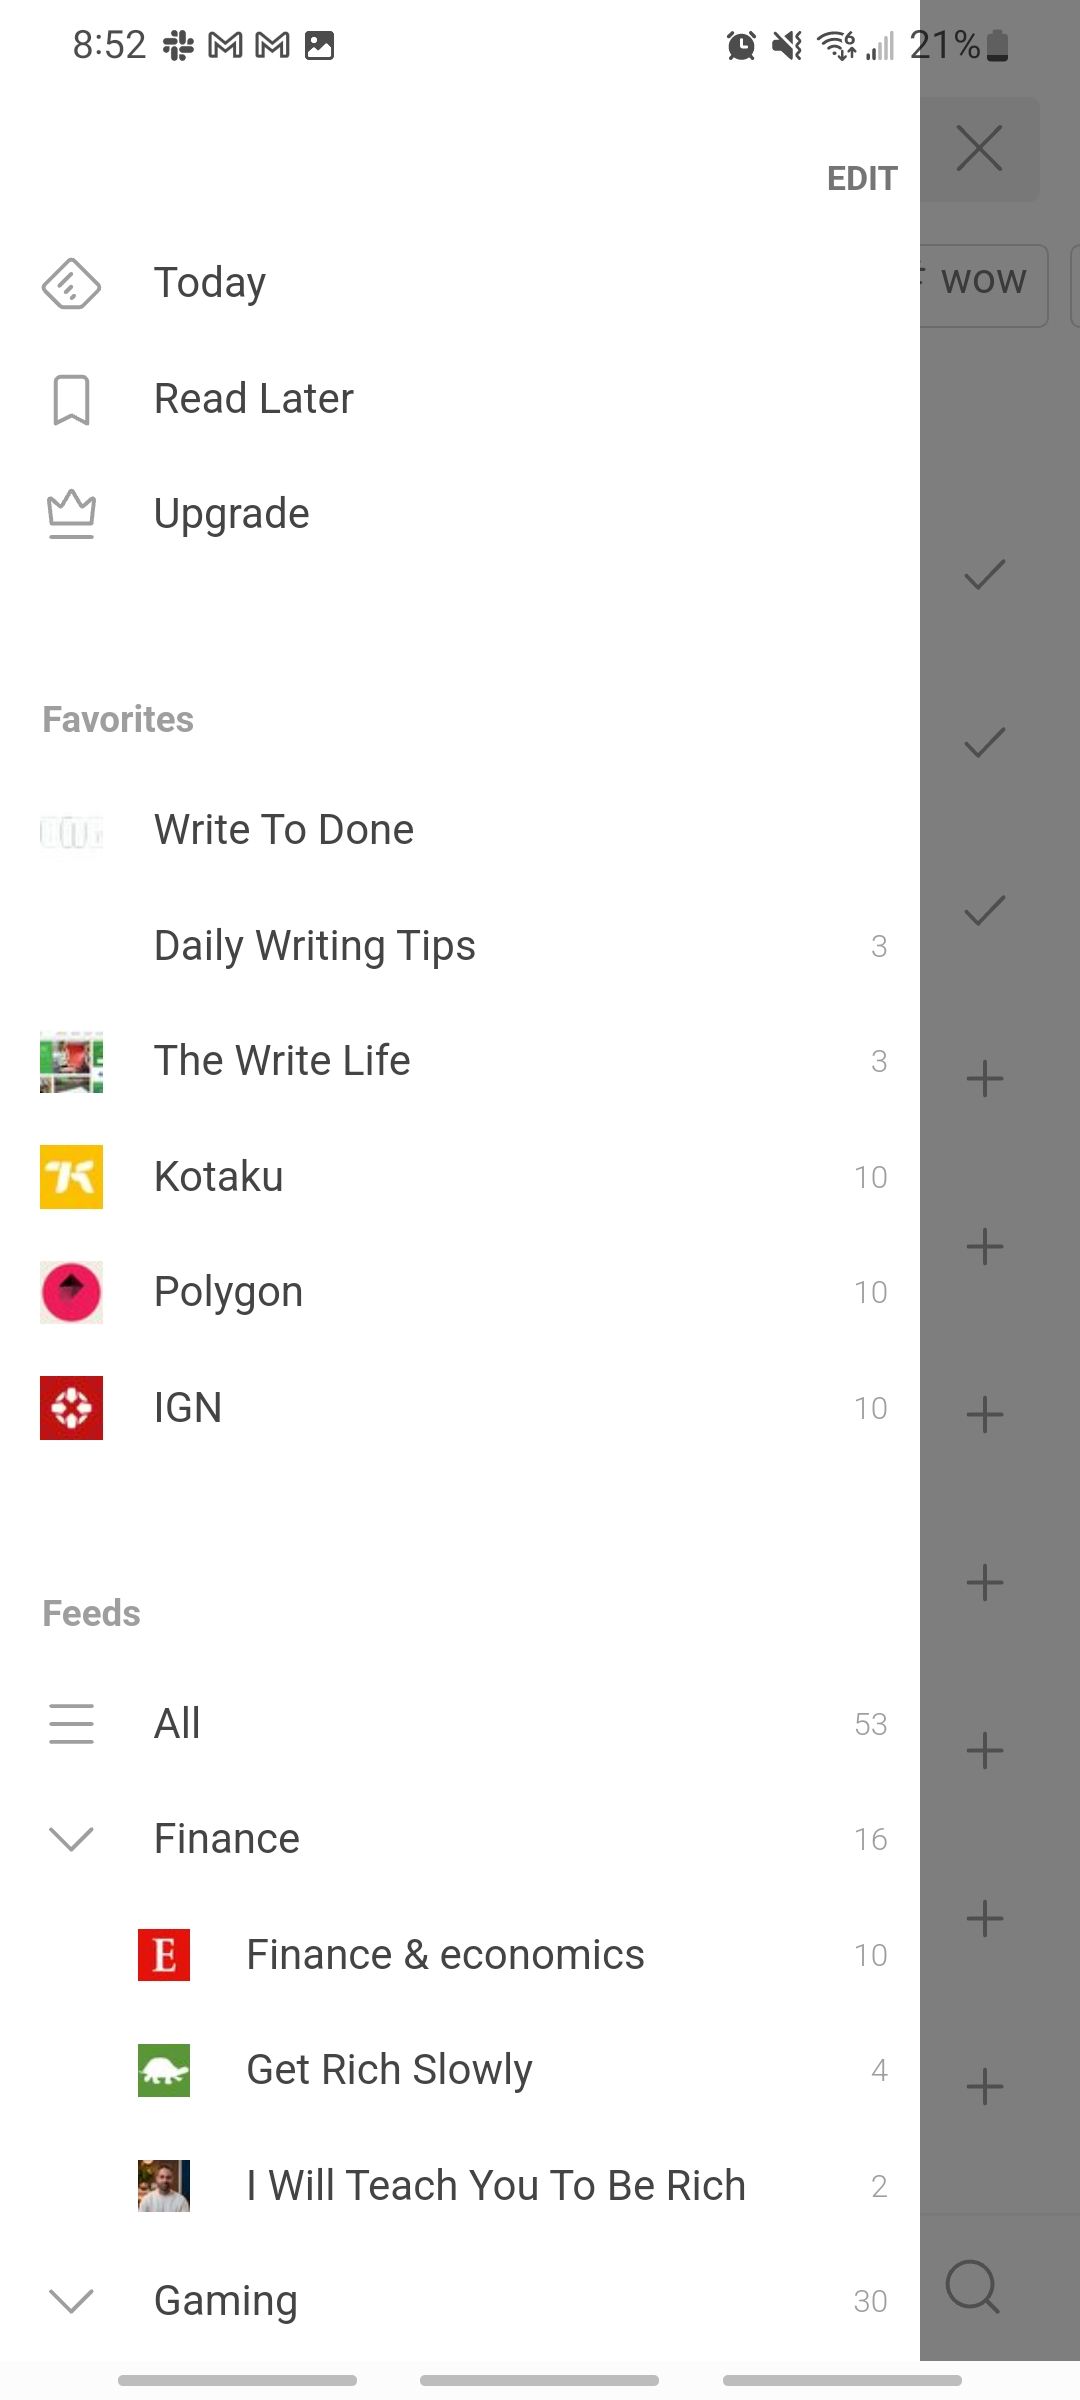 feedly app showing favorites and feeds for easy access